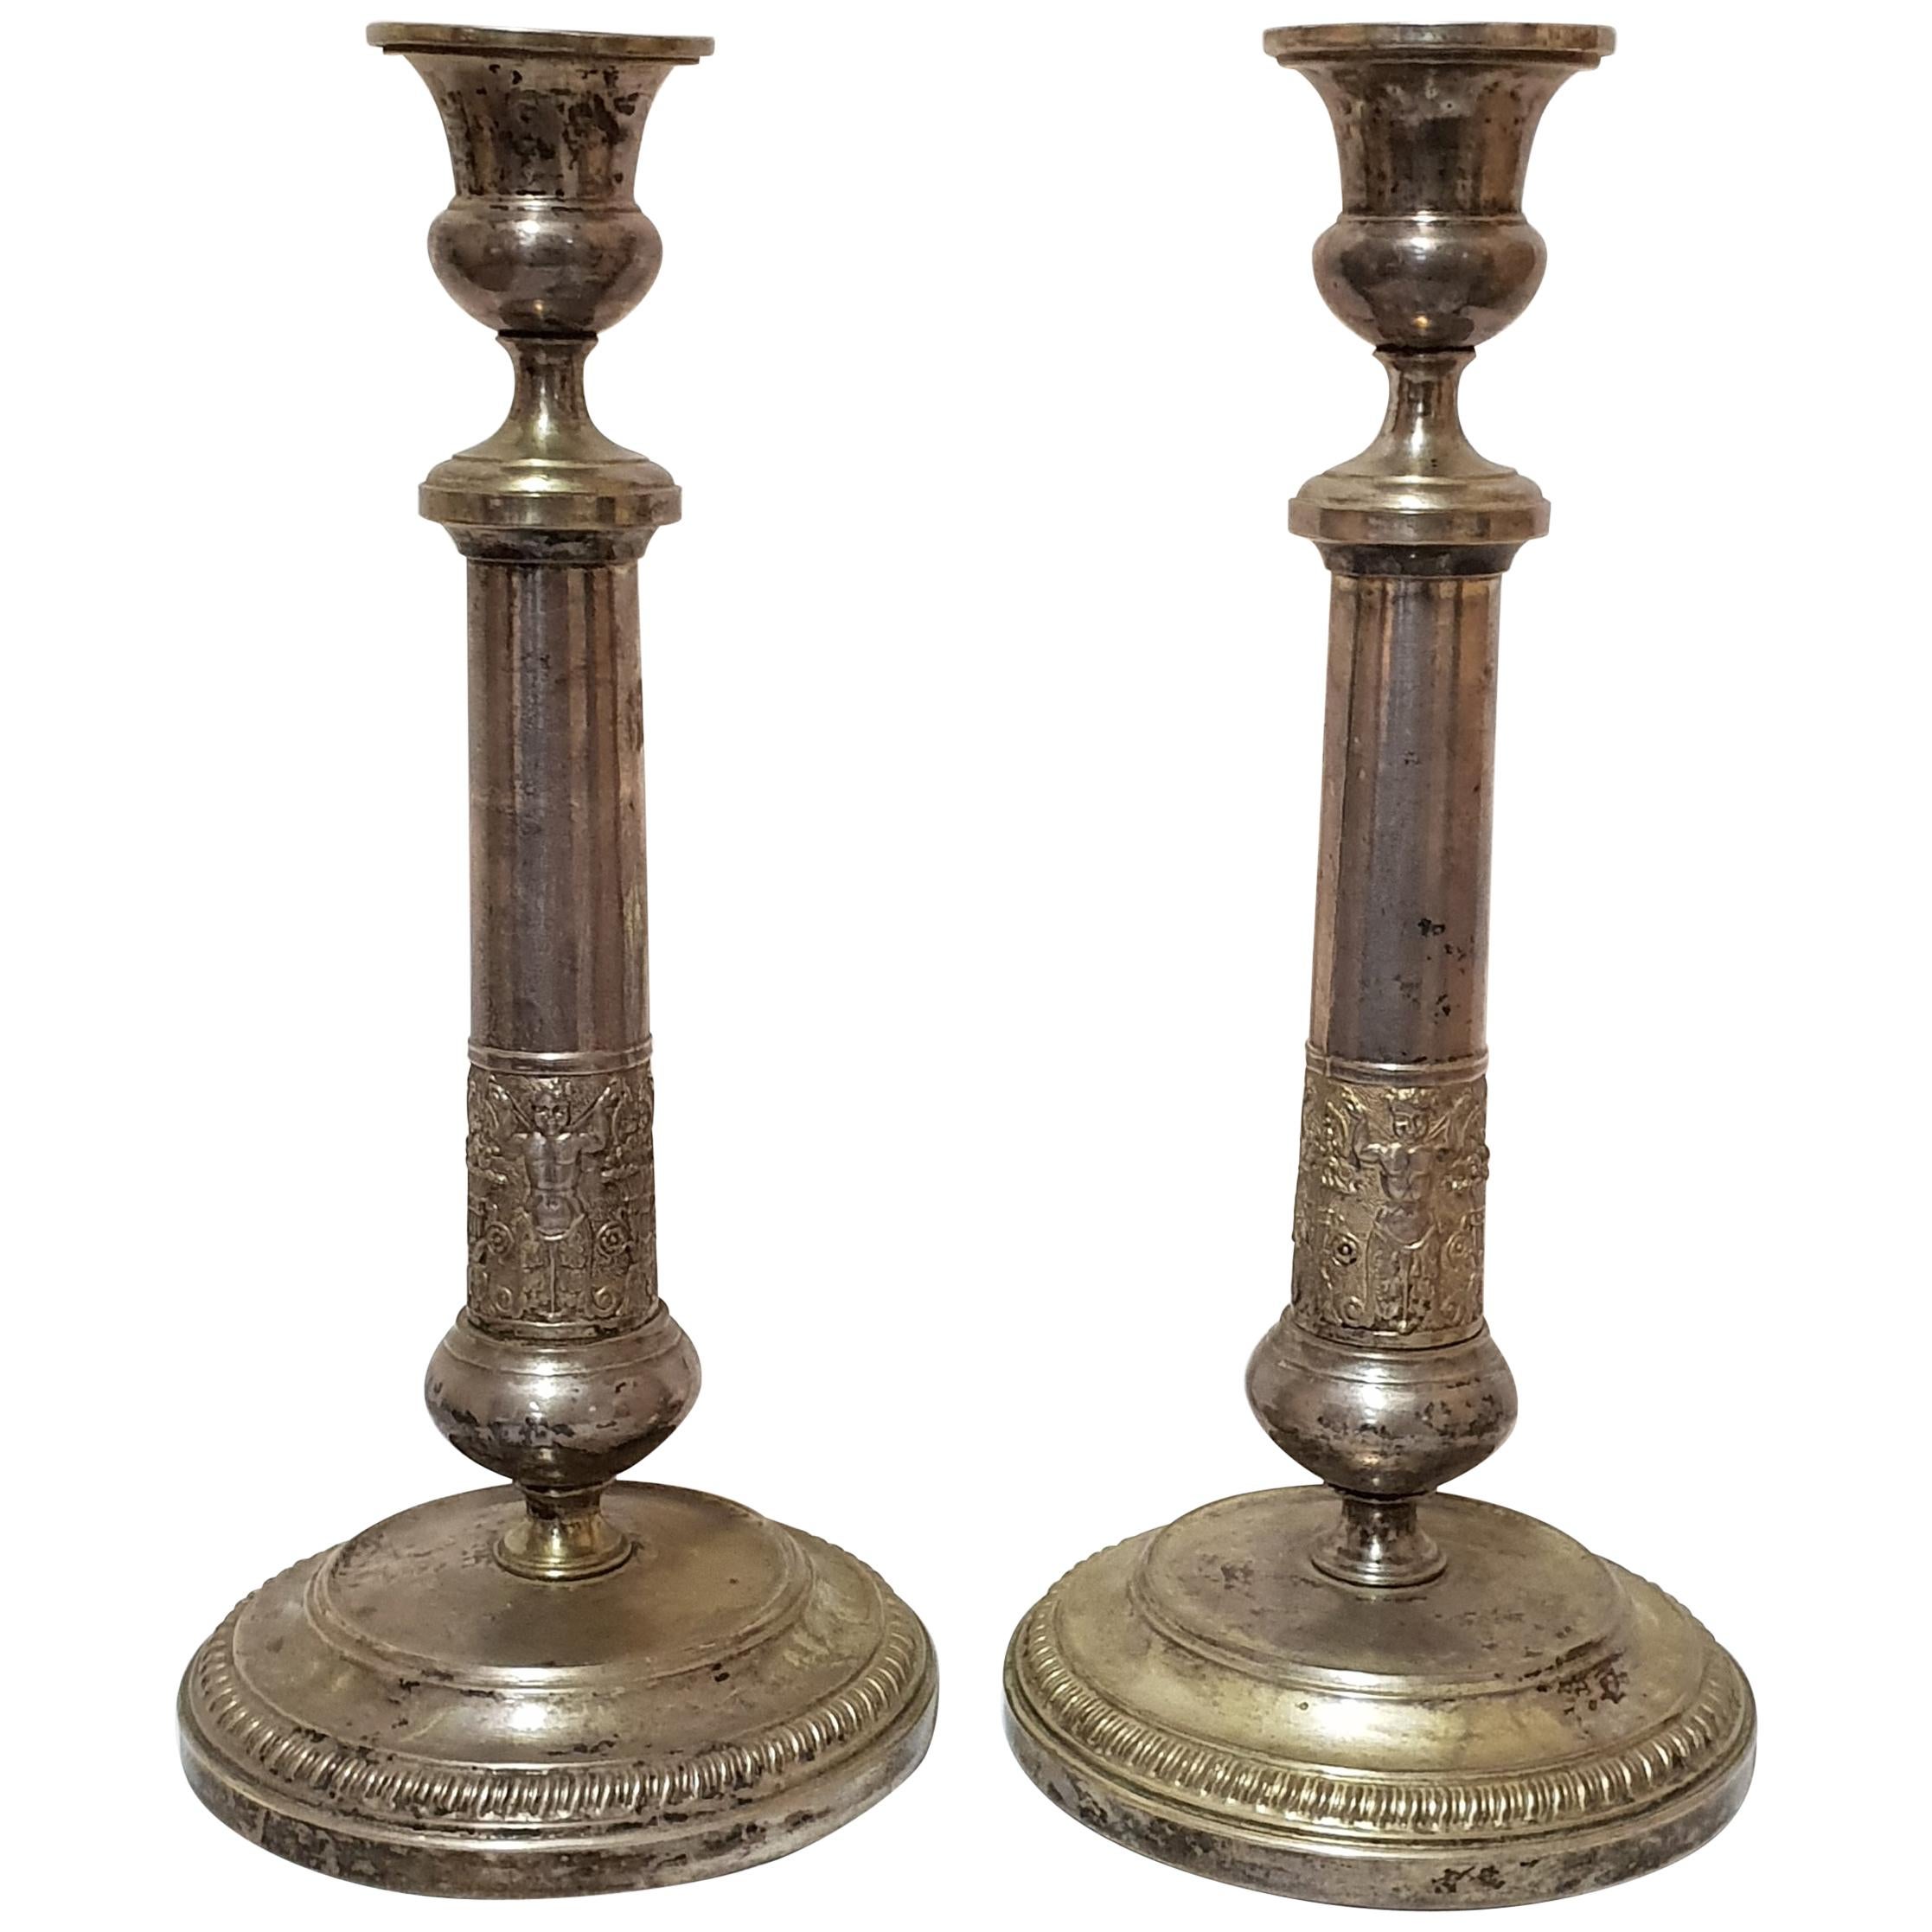 Pair of Neoclassical Silver Plated Candlesticks, 1830s